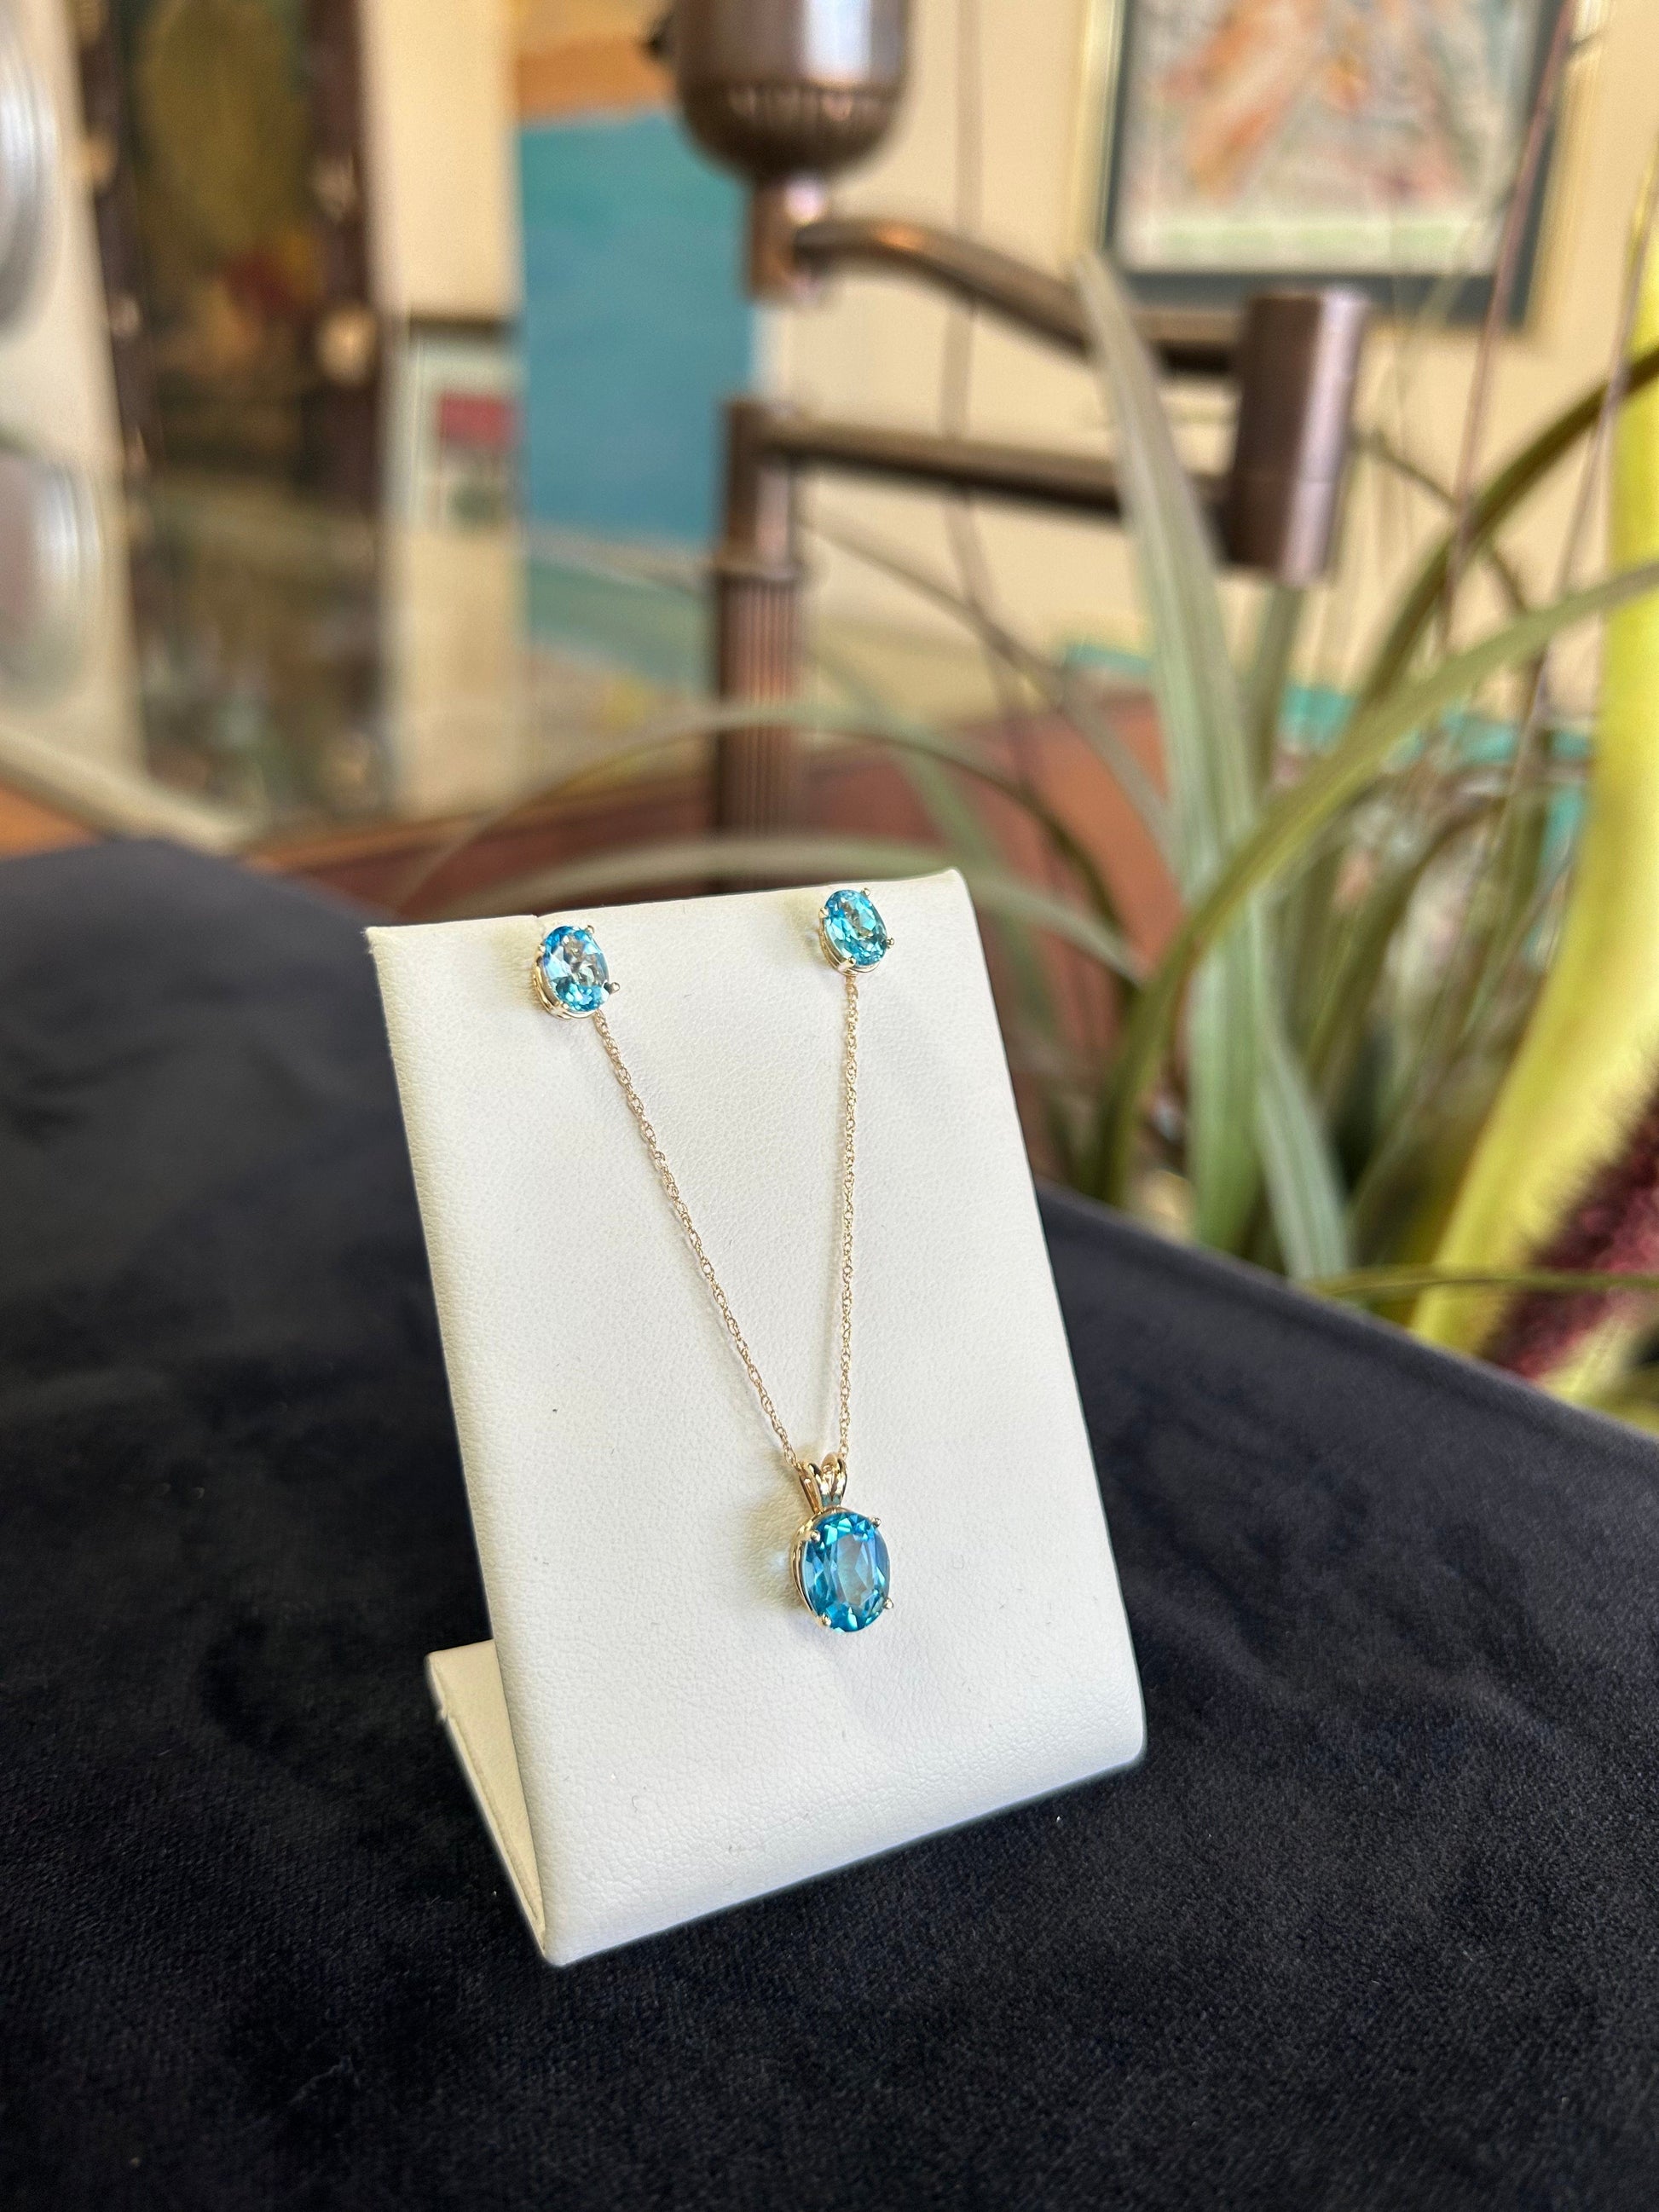 Blue Topaz Jewelry Set Earrings and Necklace Yellow Gold 14kt